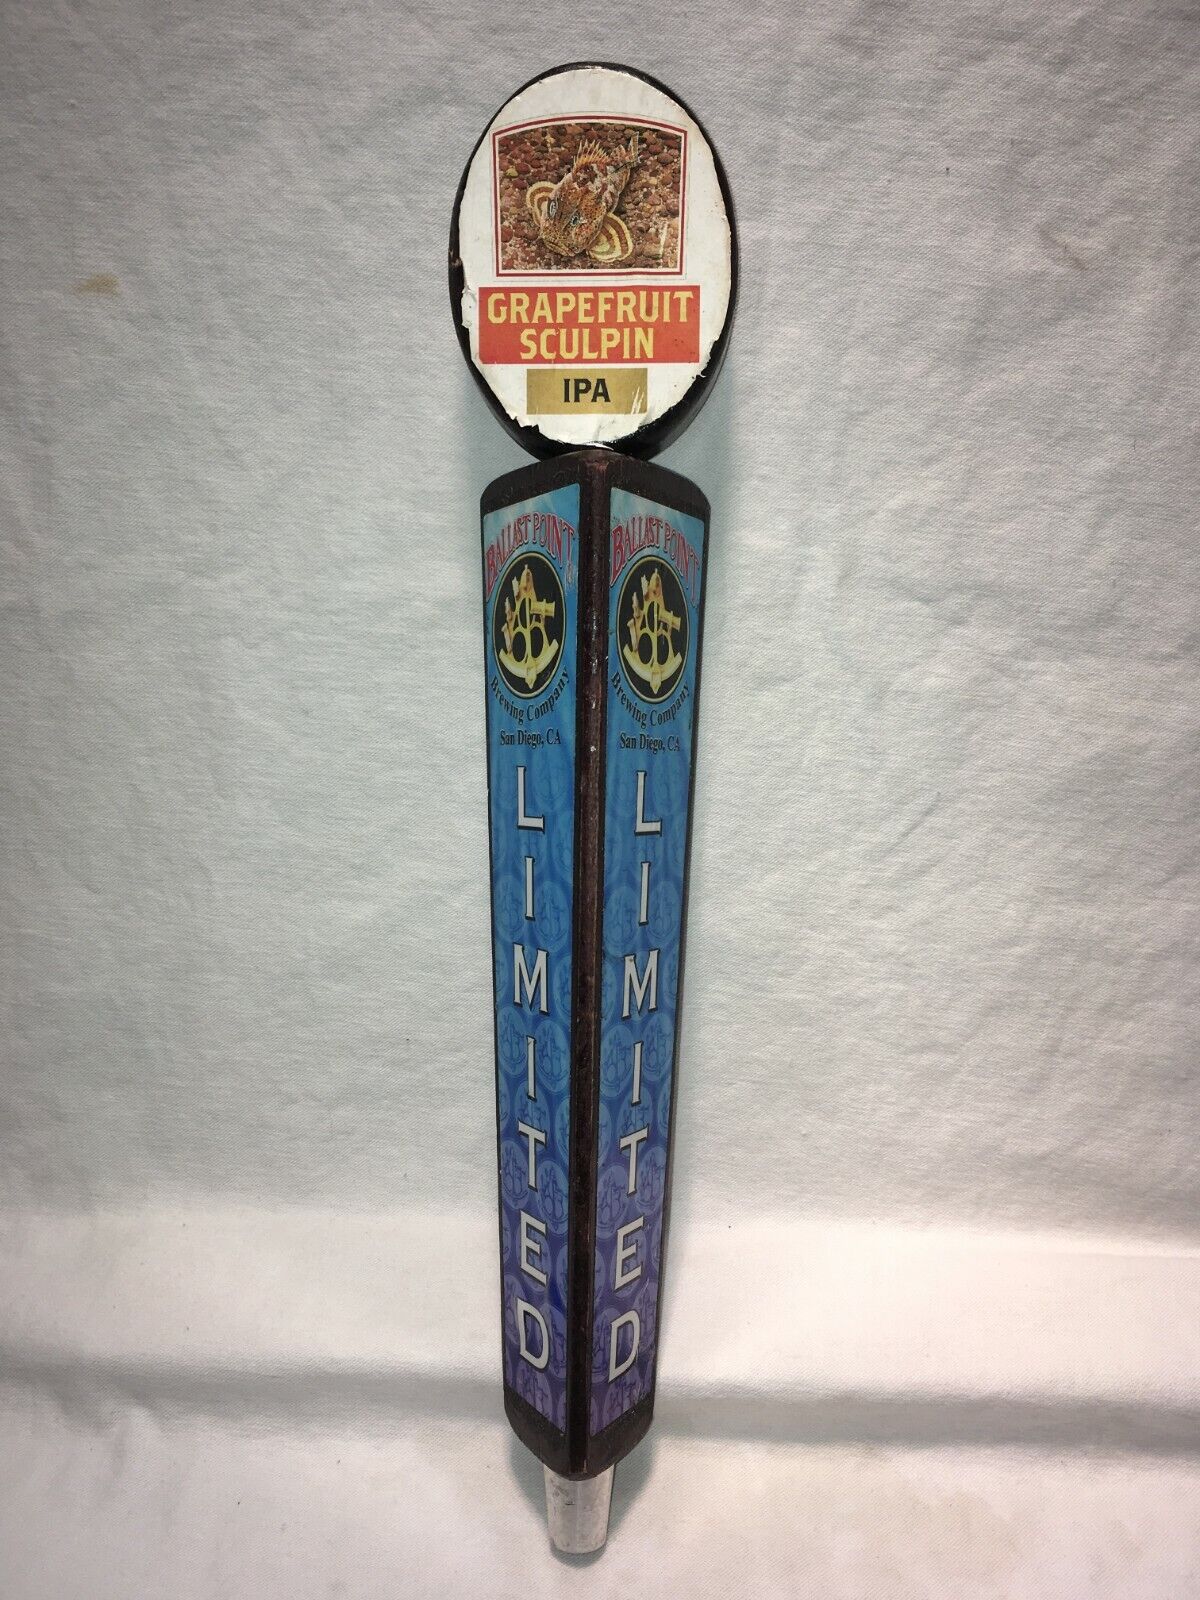 RARE BALLAST POINT BREWING GRAPEFRUIT SCULPIN IPA LIMITED 3 SIDE BEER TAP HANDLE